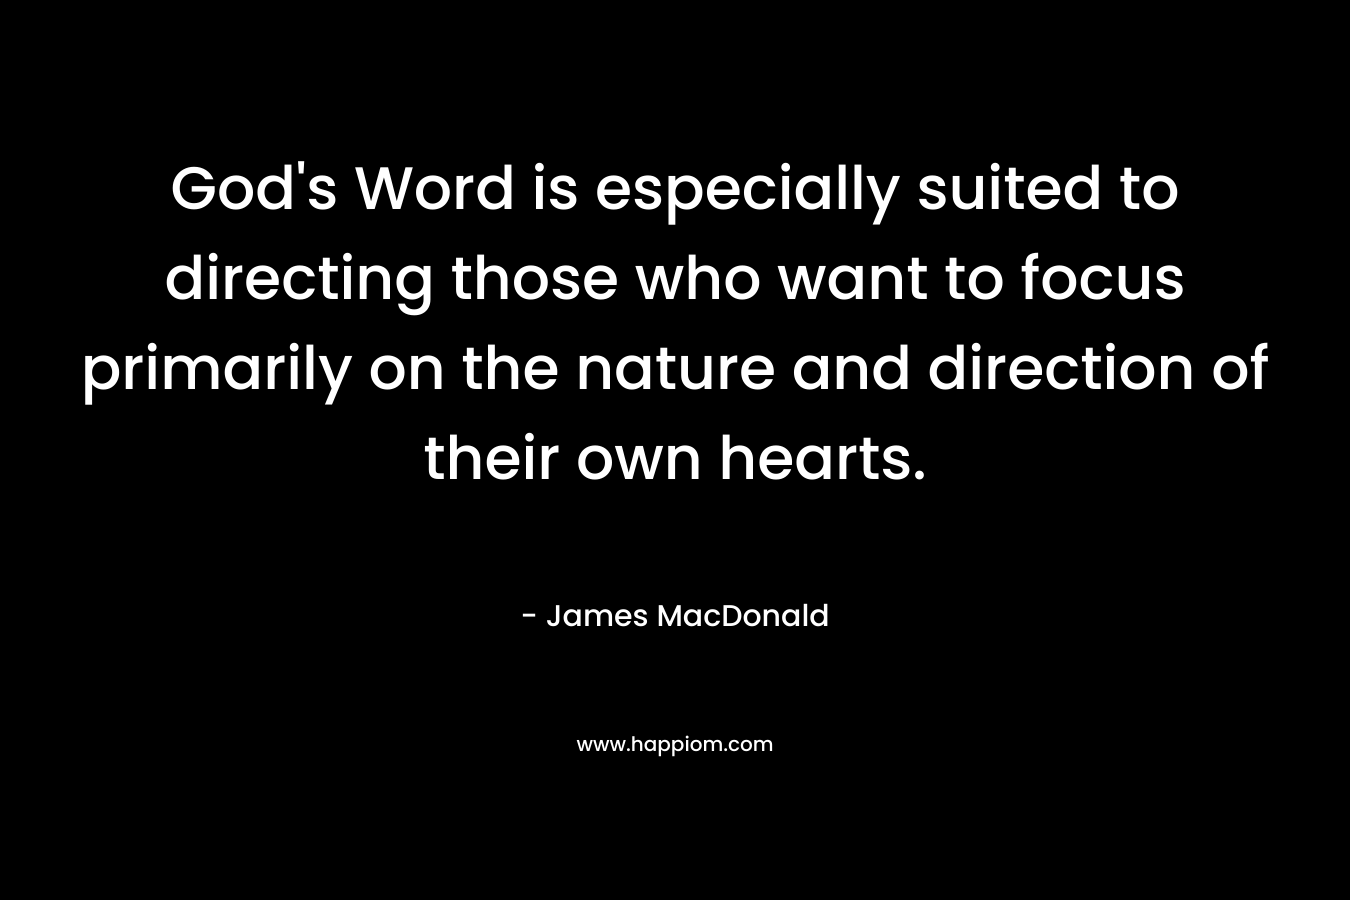 God's Word is especially suited to directing those who want to focus primarily on the nature and direction of their own hearts.